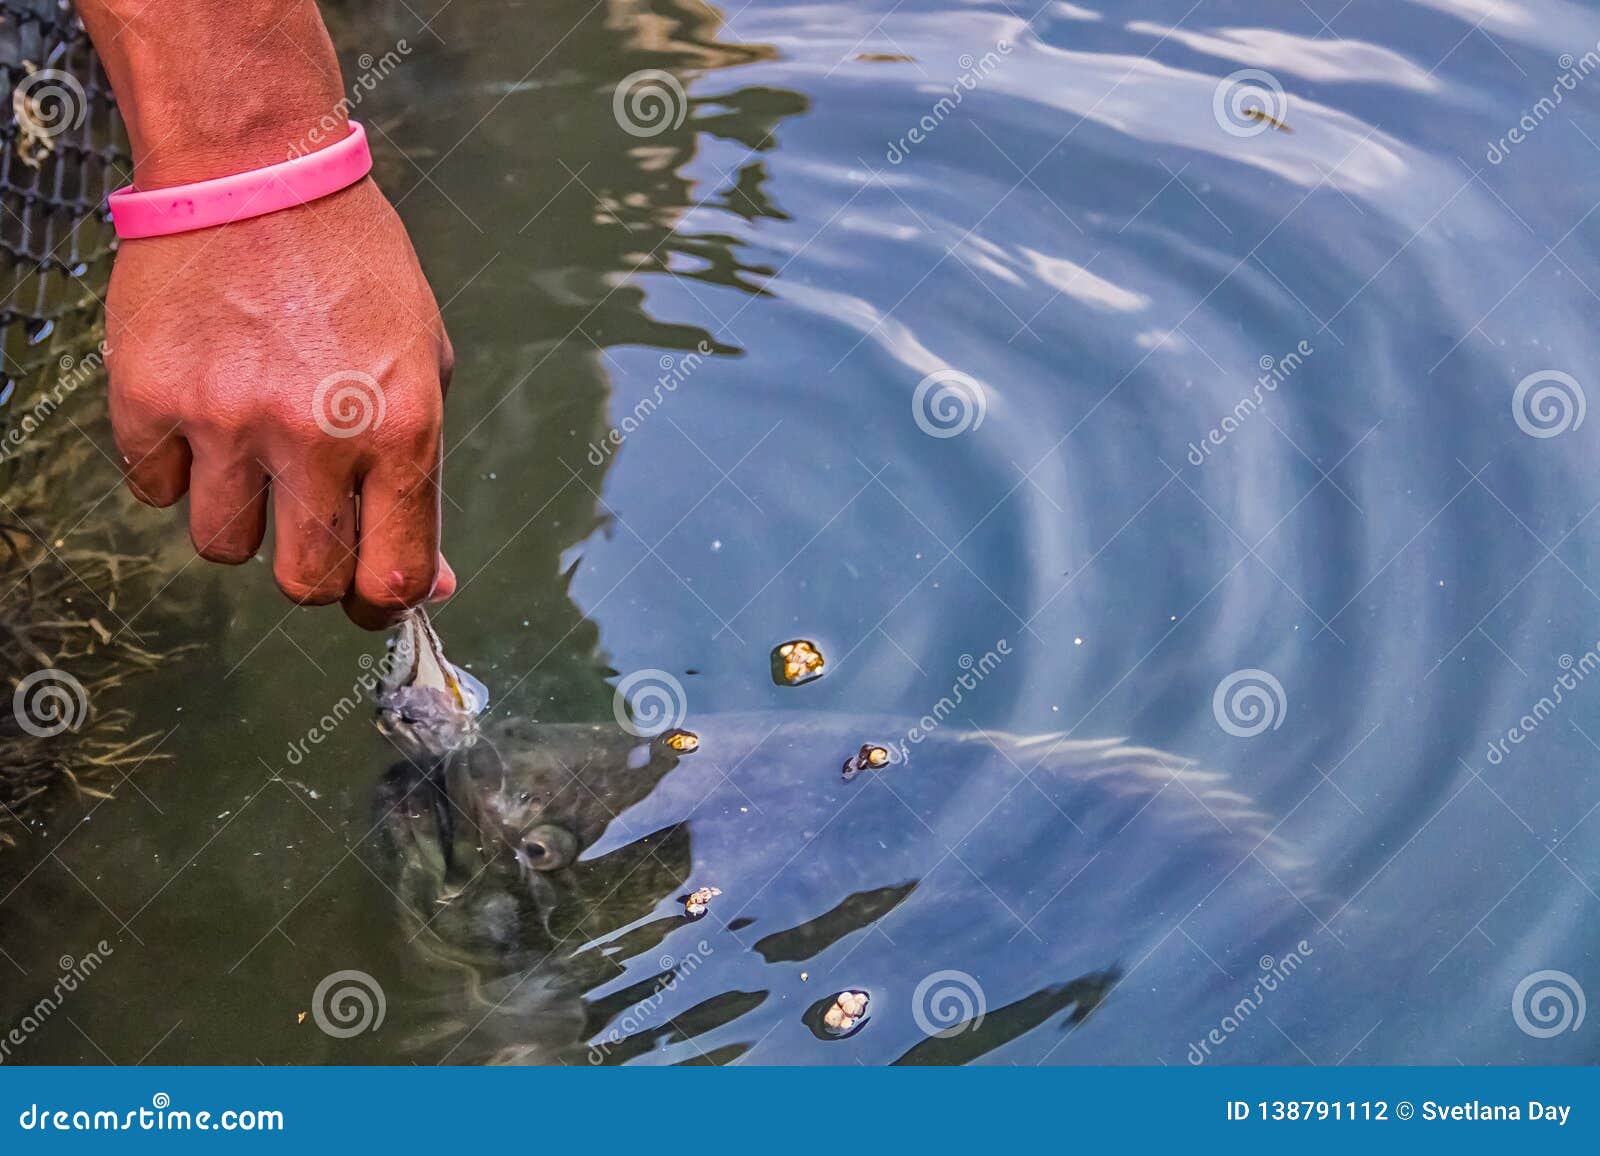 piranha fish close to the surface for a feeding at a fish farm in krabi province of thailand